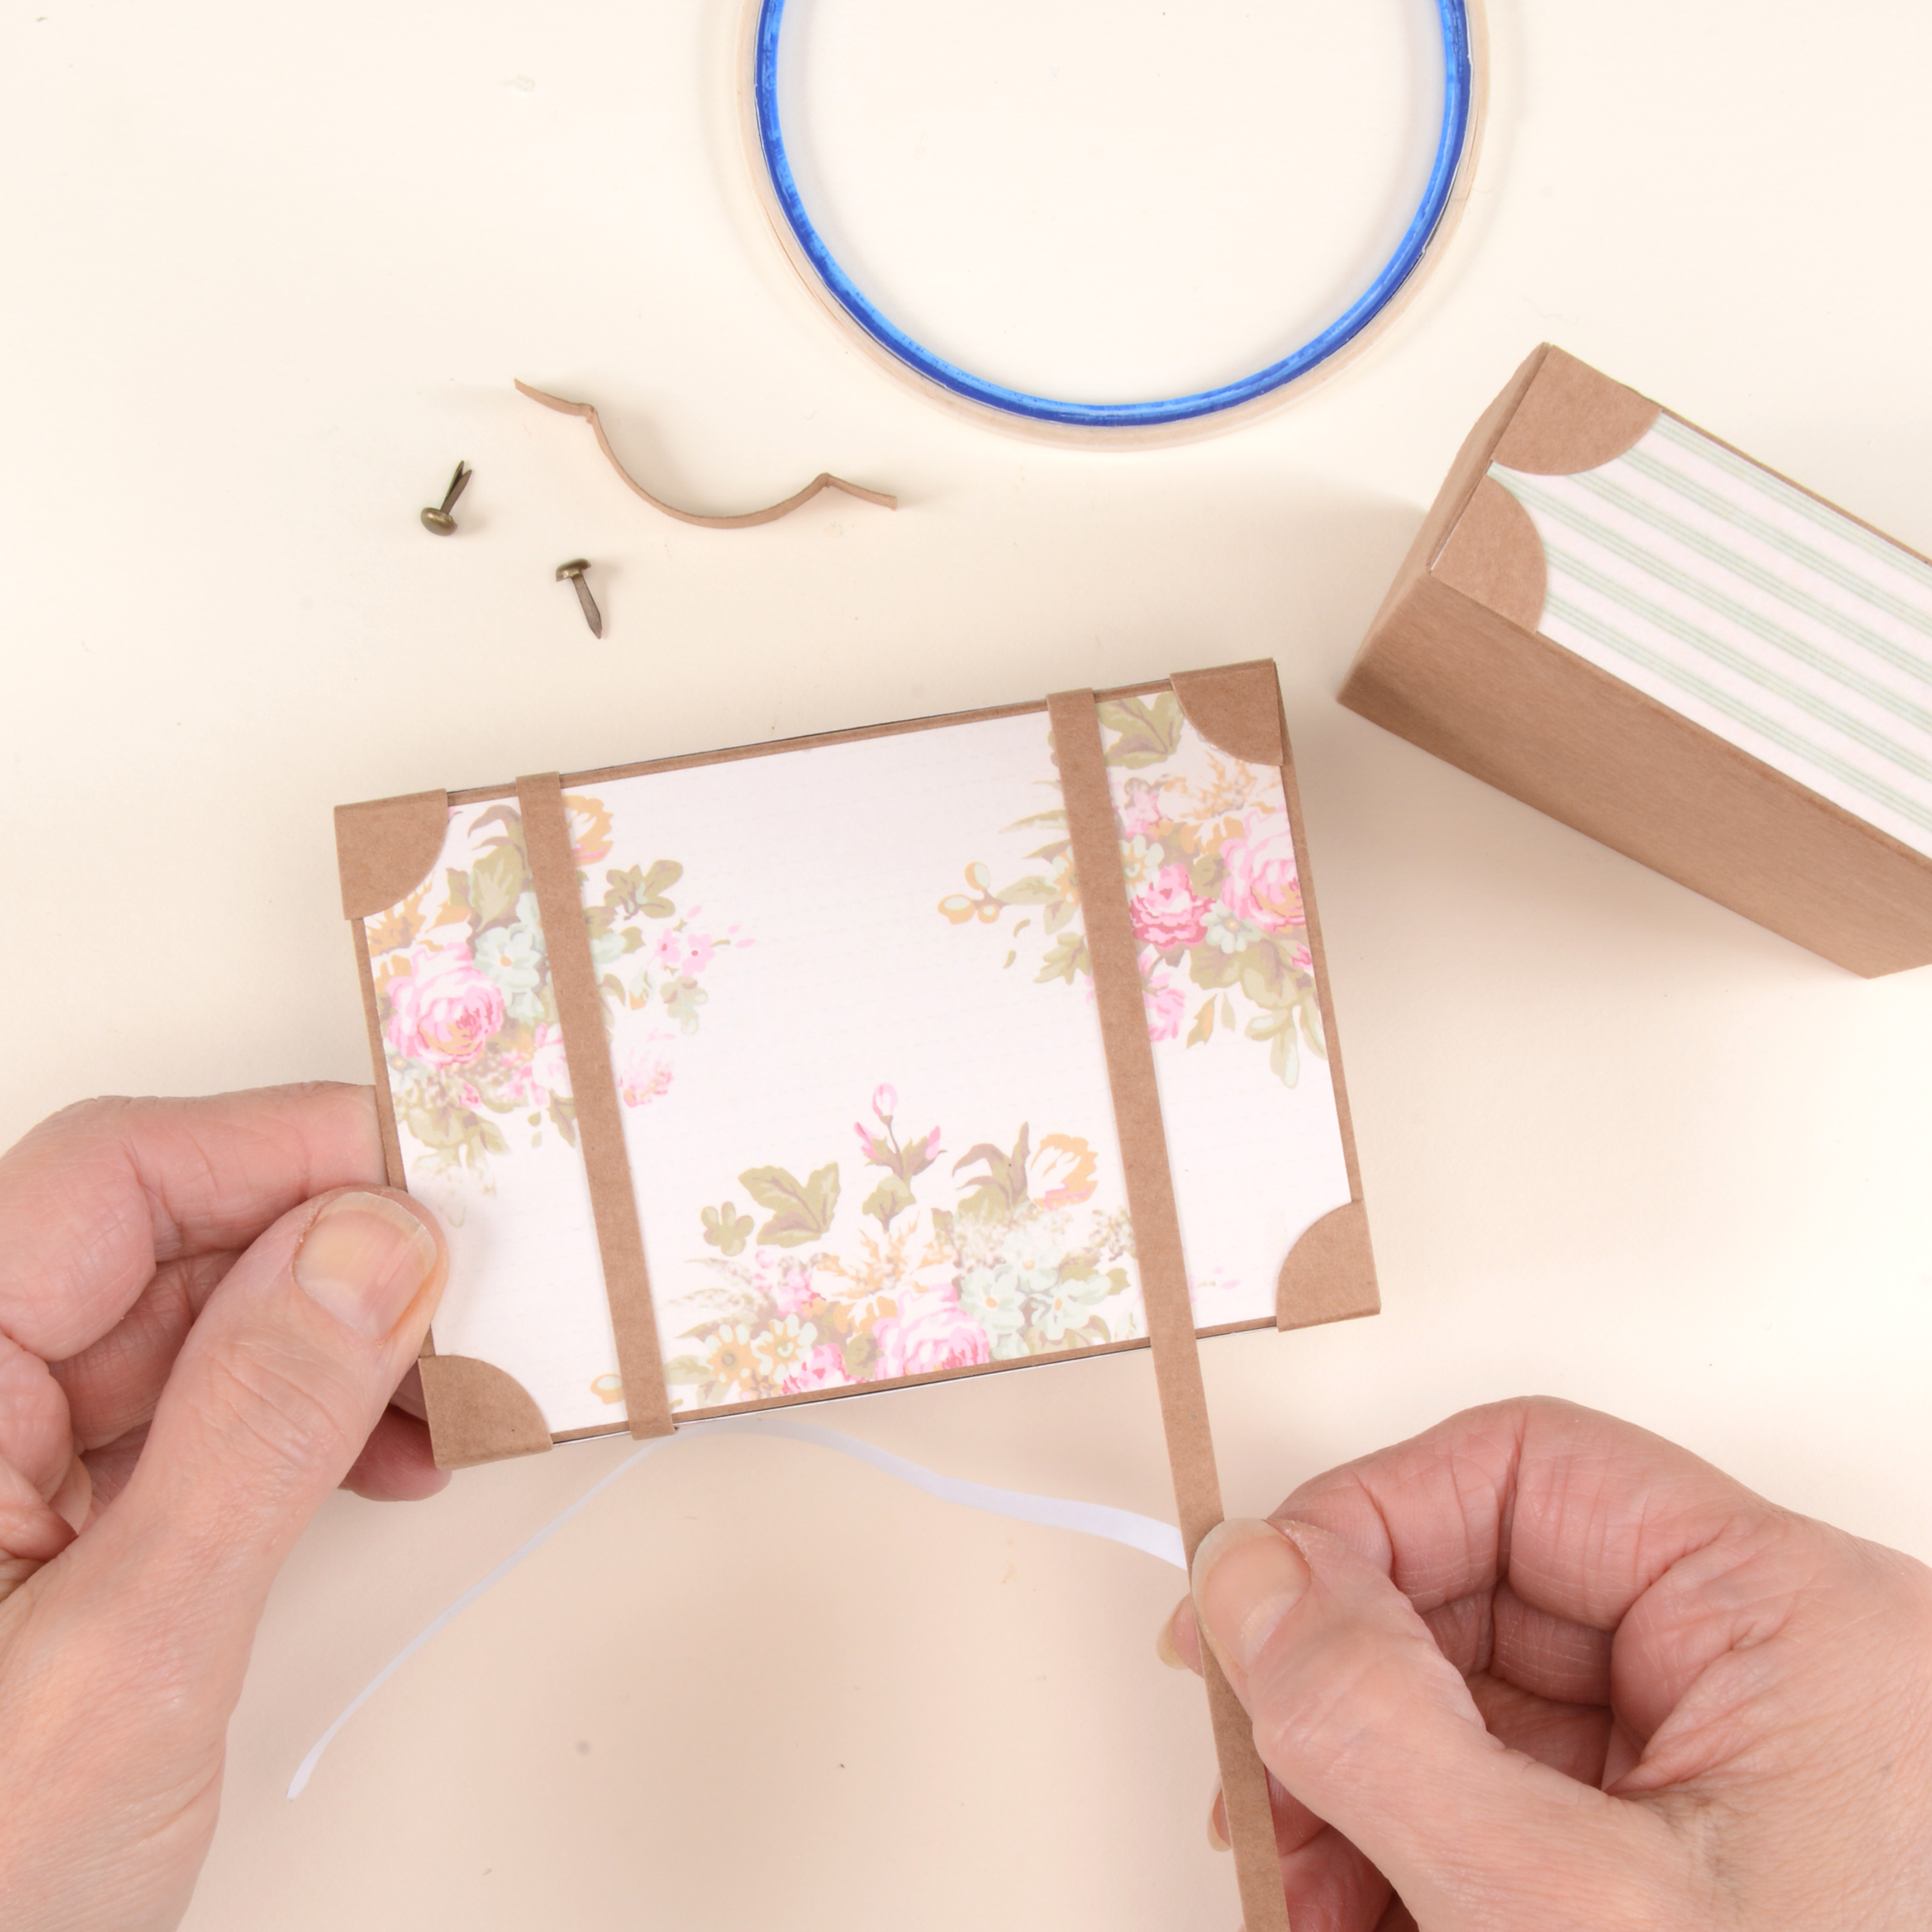 Make a suitcase gift box out of paper